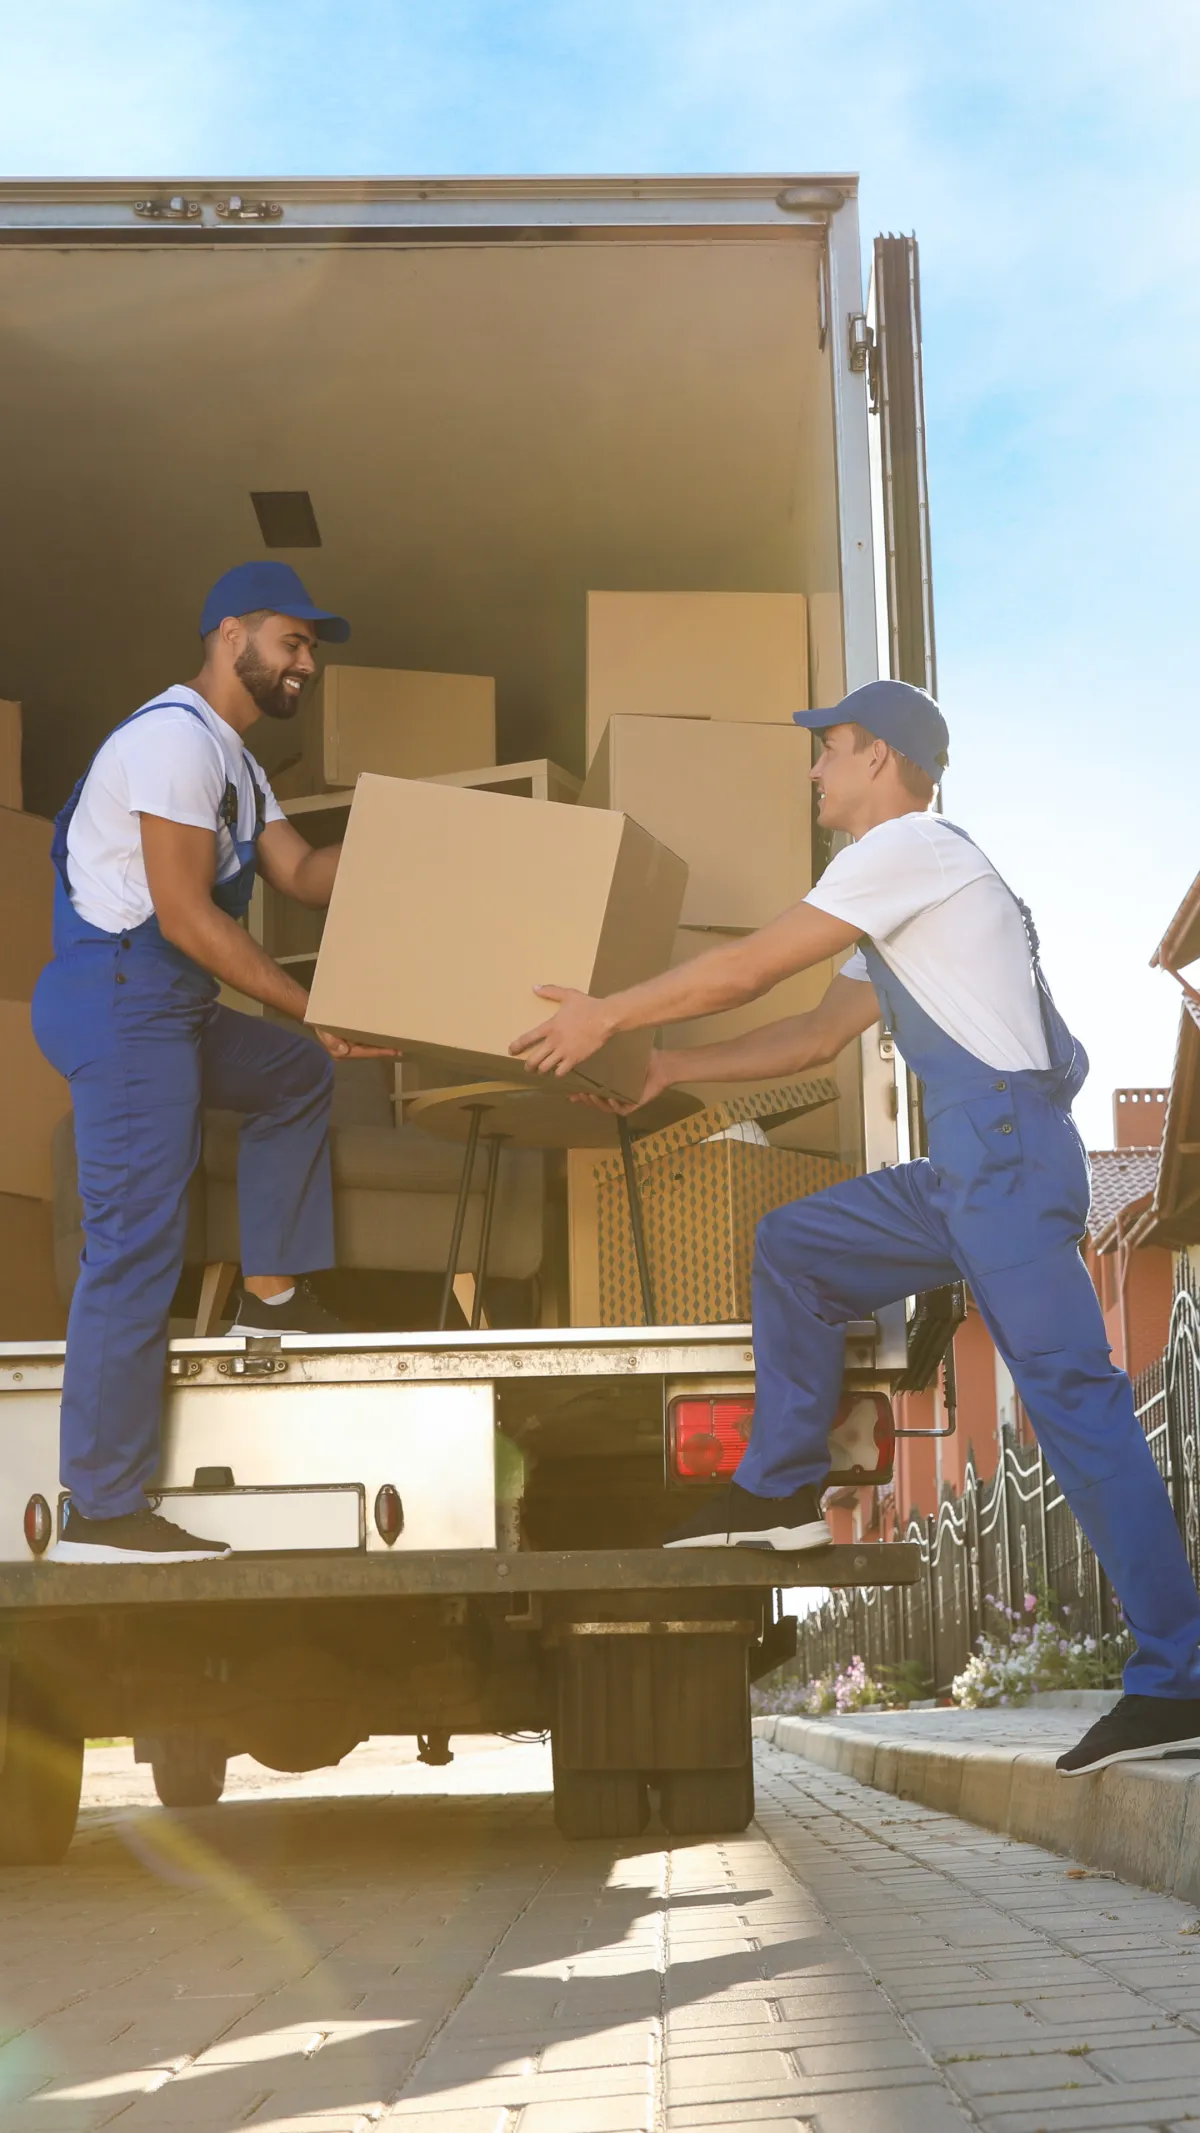 Alvy Delivers: Premier Same-Day Courier Services in Los Angeles